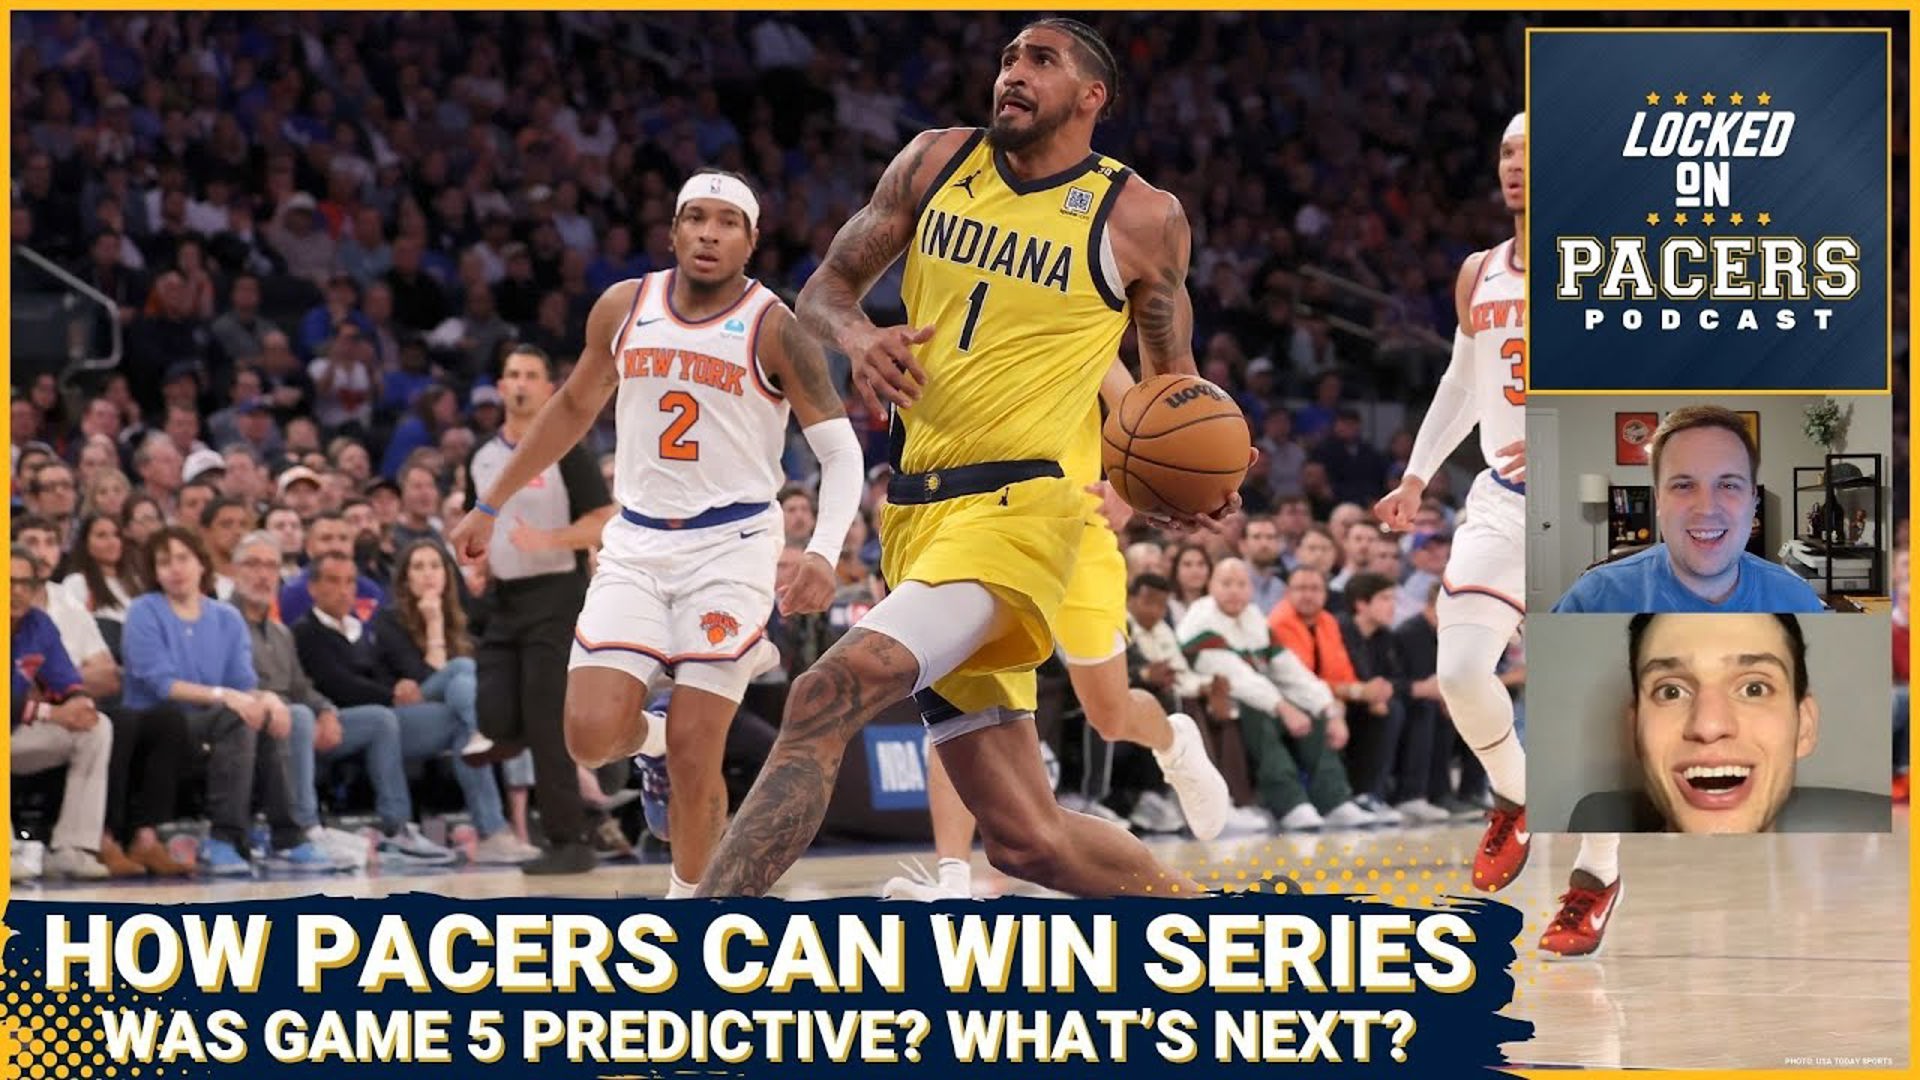 The keys to the Indiana Pacers bouncing back in their series with the New York Knicks